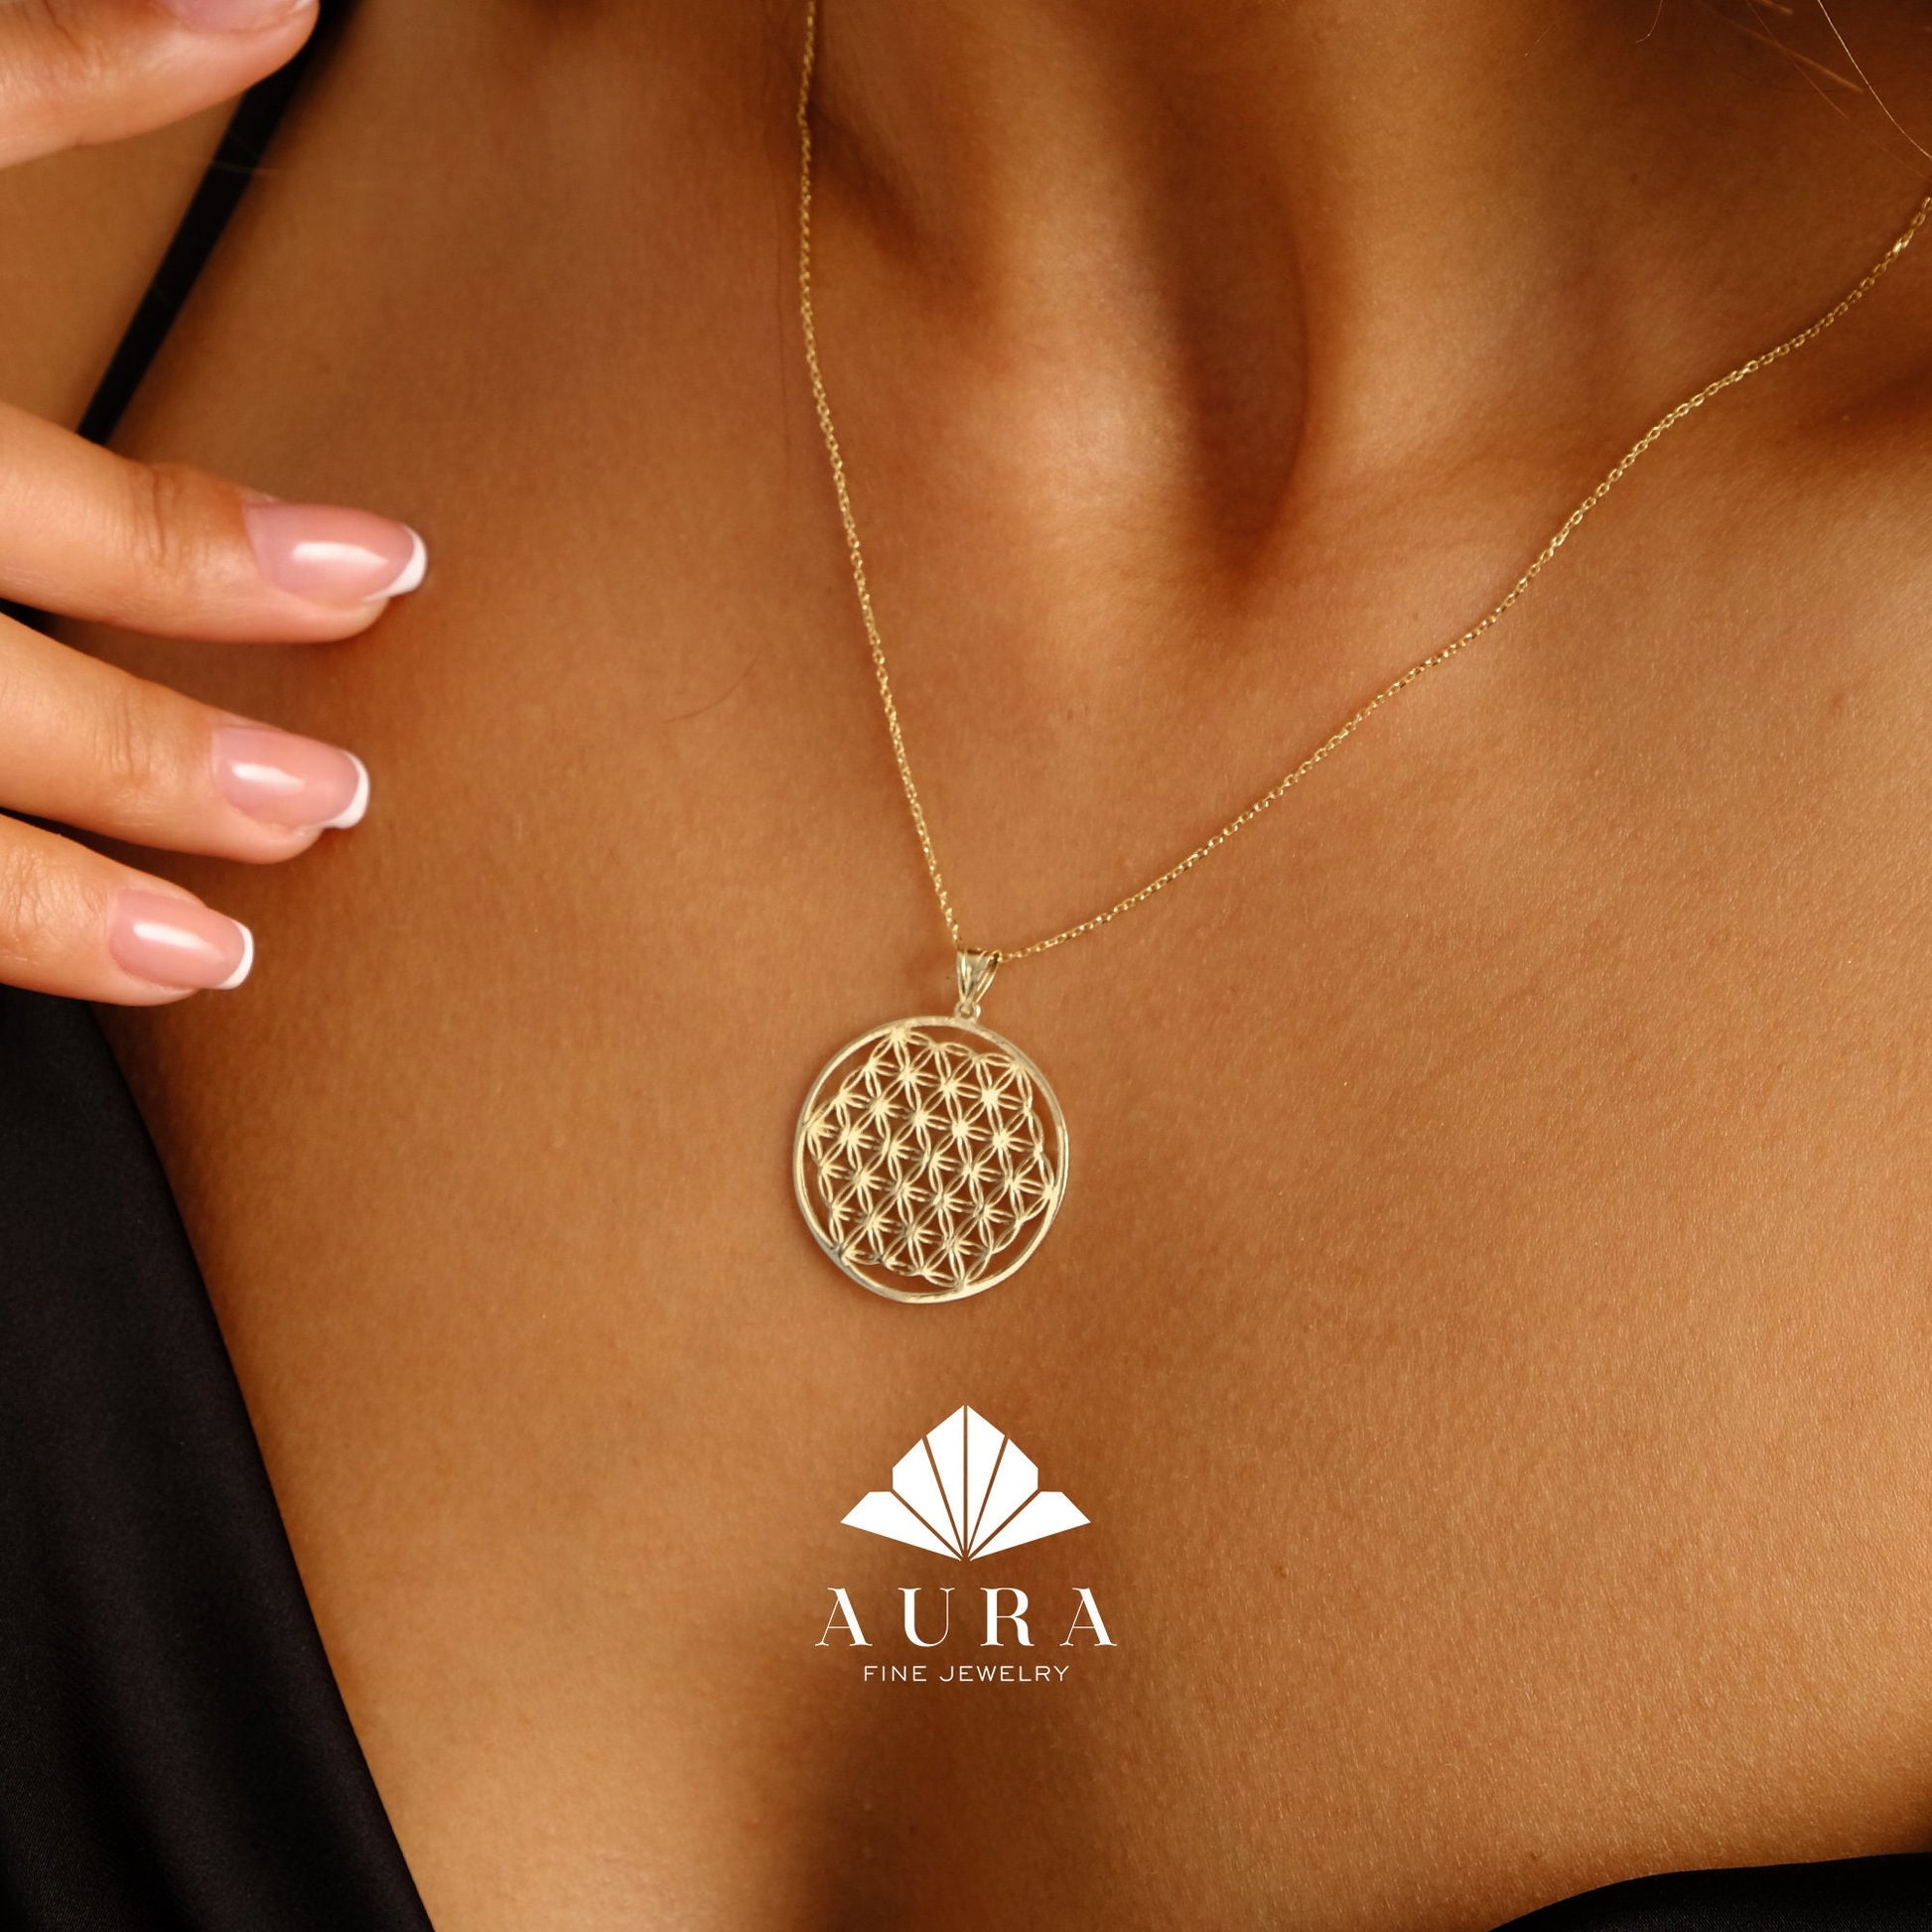 14K Gold Flower Of Life Necklace, Seed of Life Necklace, Handmade Necklace, Flower Of Life Pendant, Geometry Medallion, Anniversary Gift